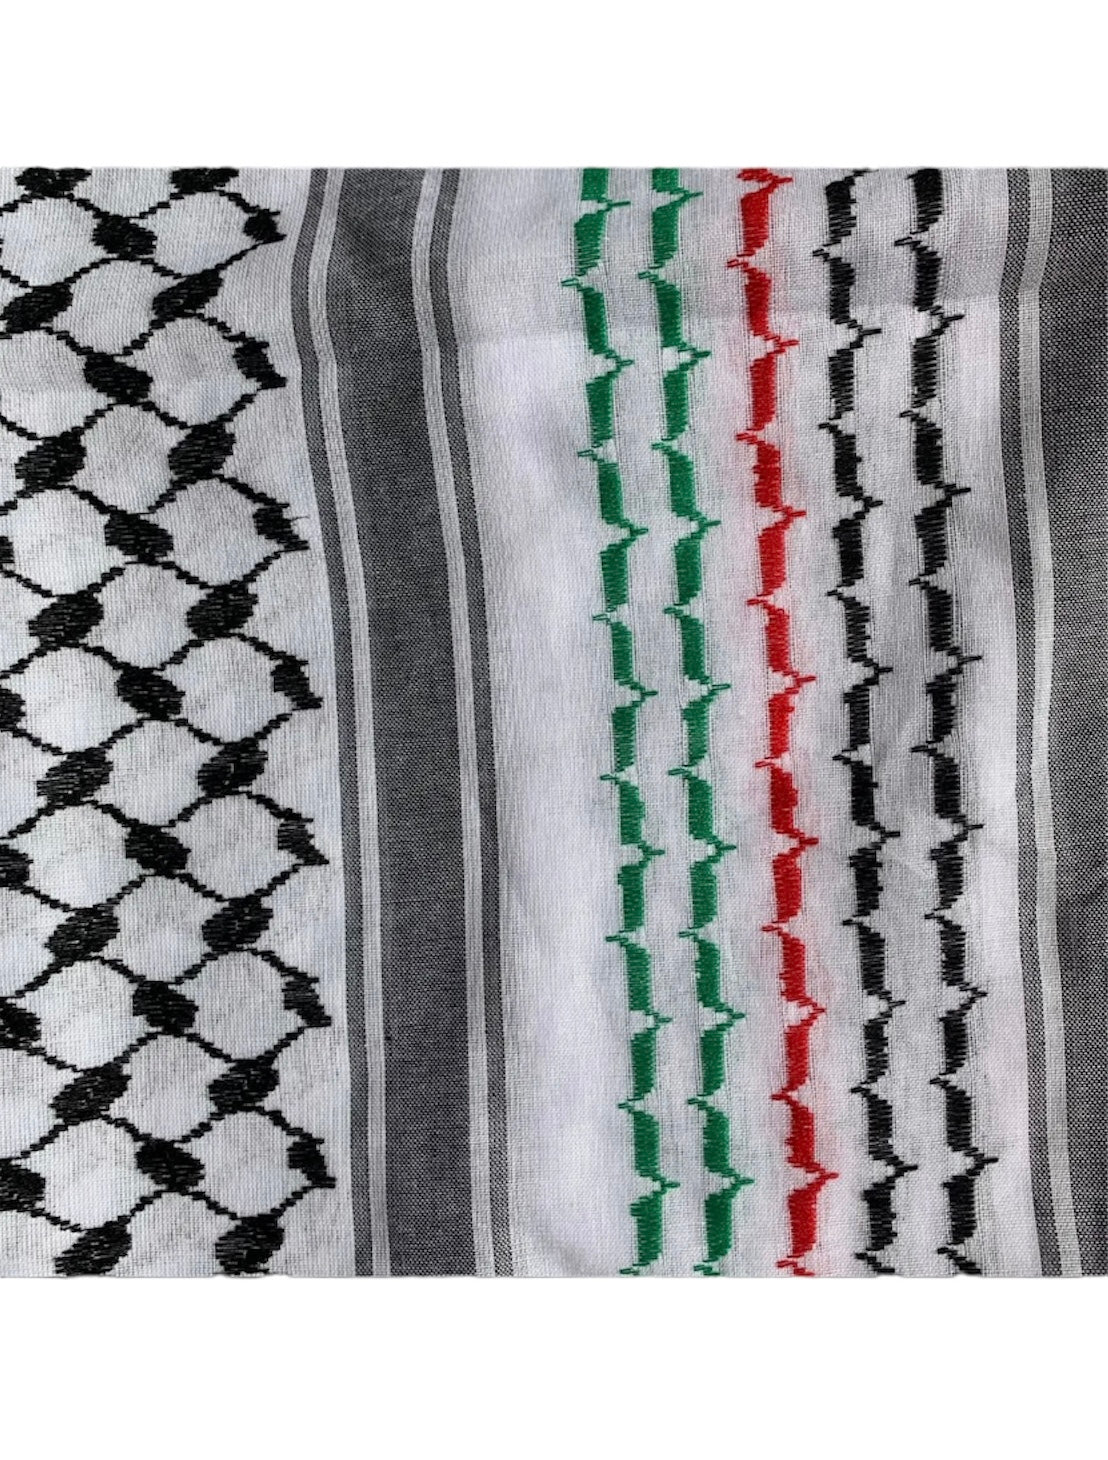 Black, Green, Red and White keffiyeh or Shemagh